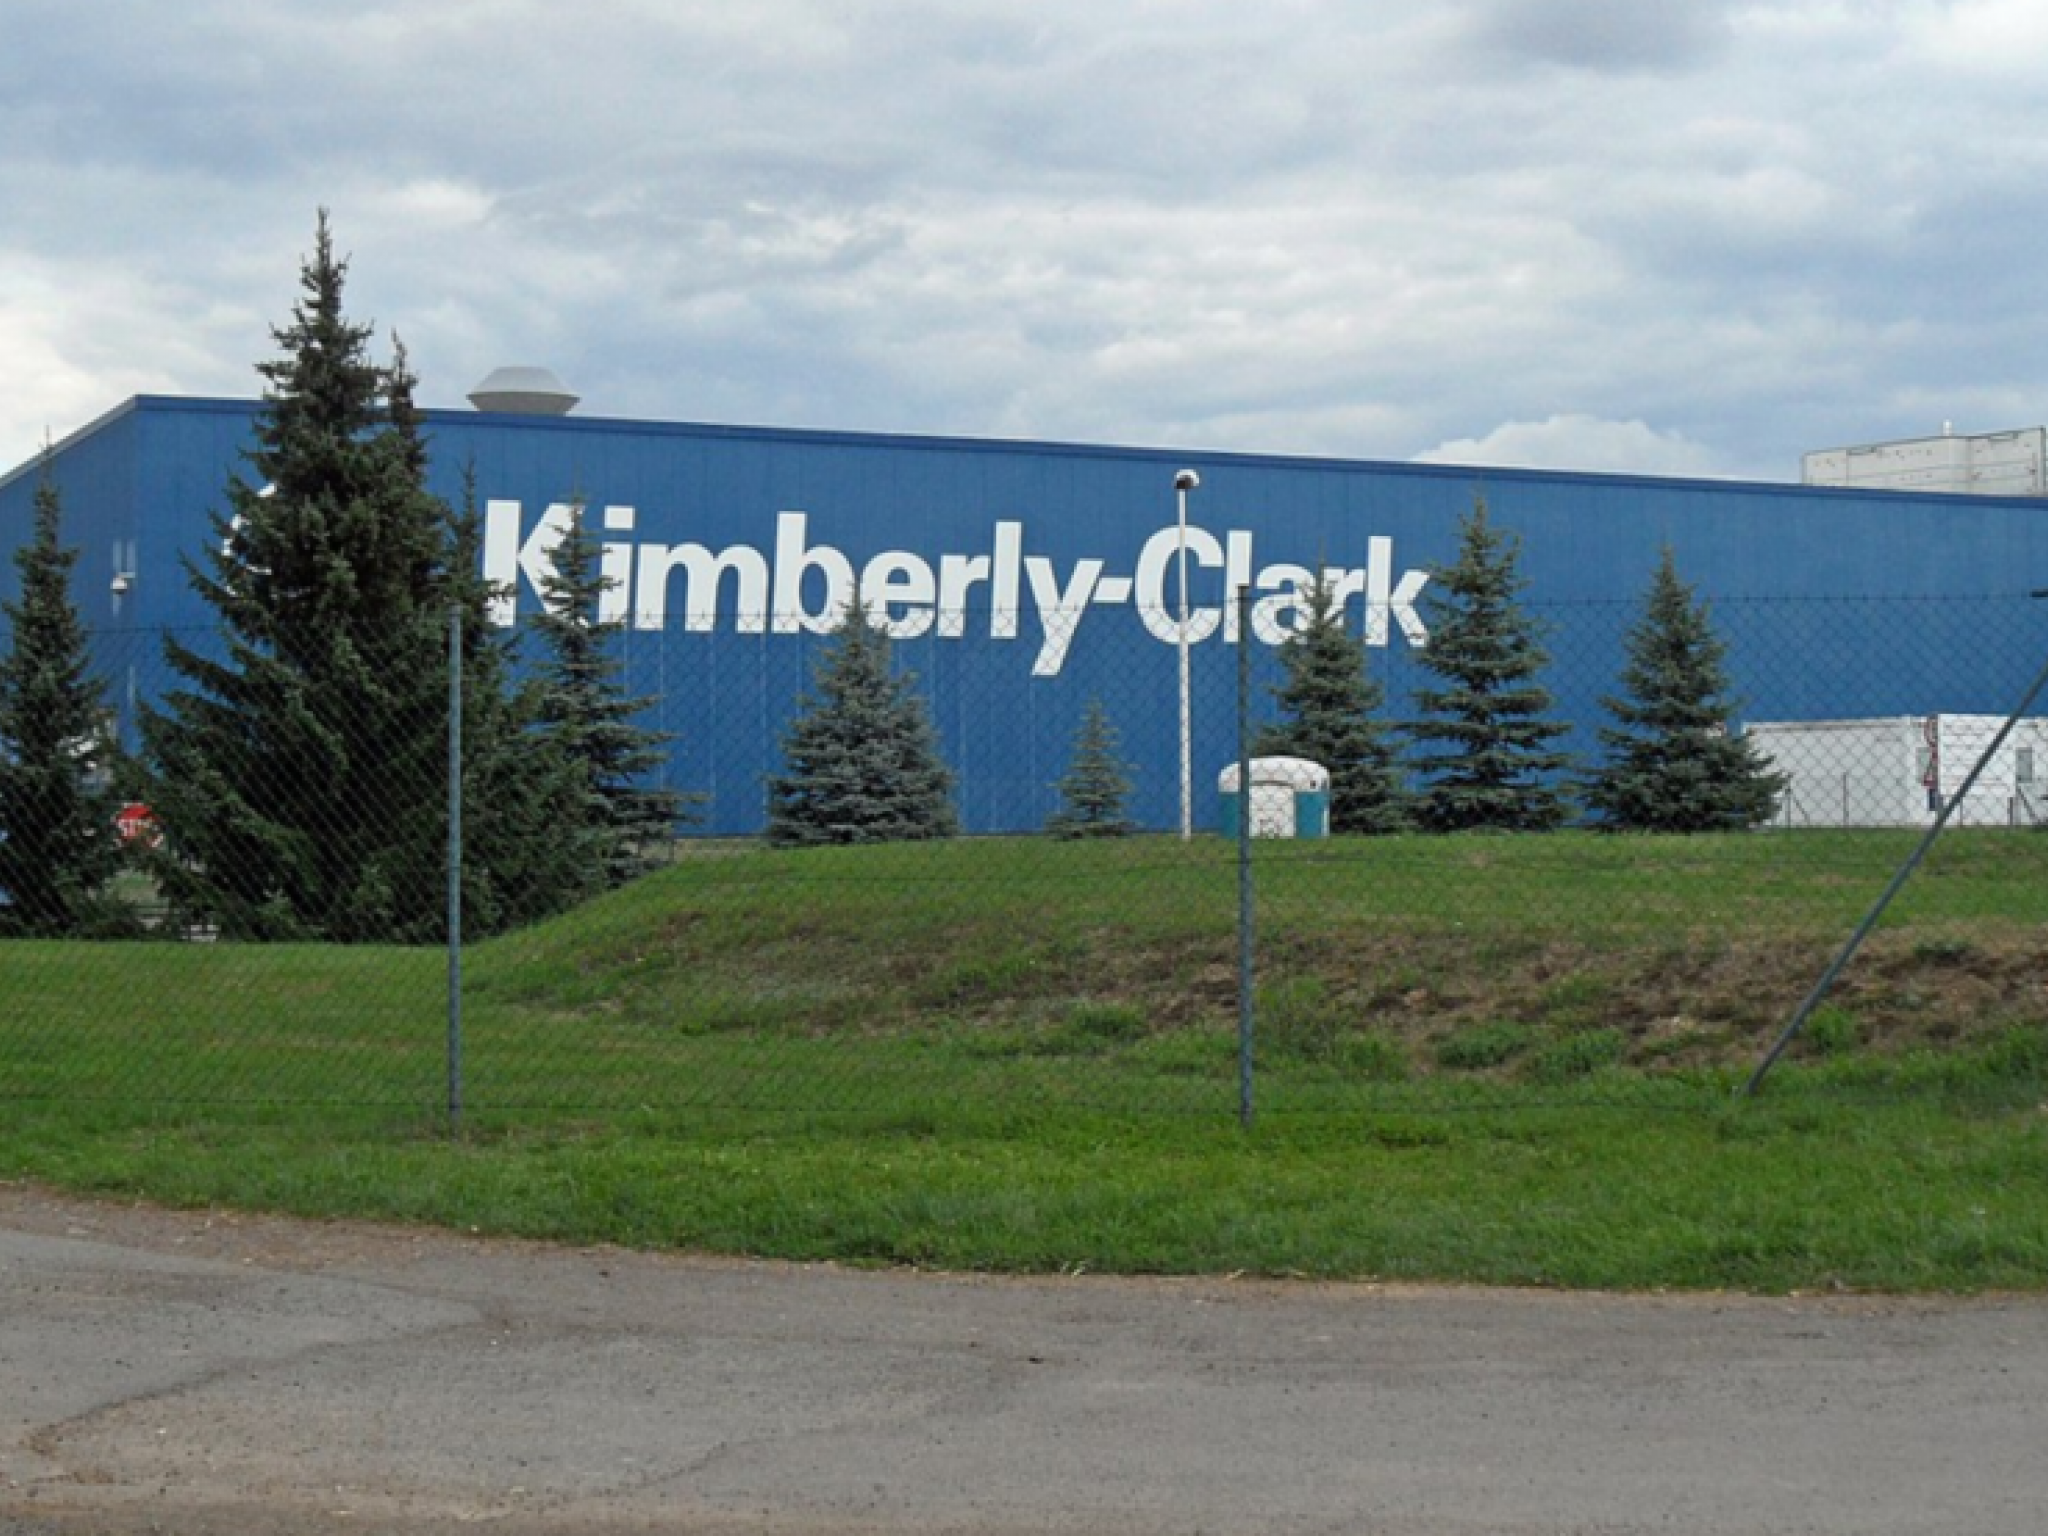  kimberly-clark-5-after-q1-results---heres-why 